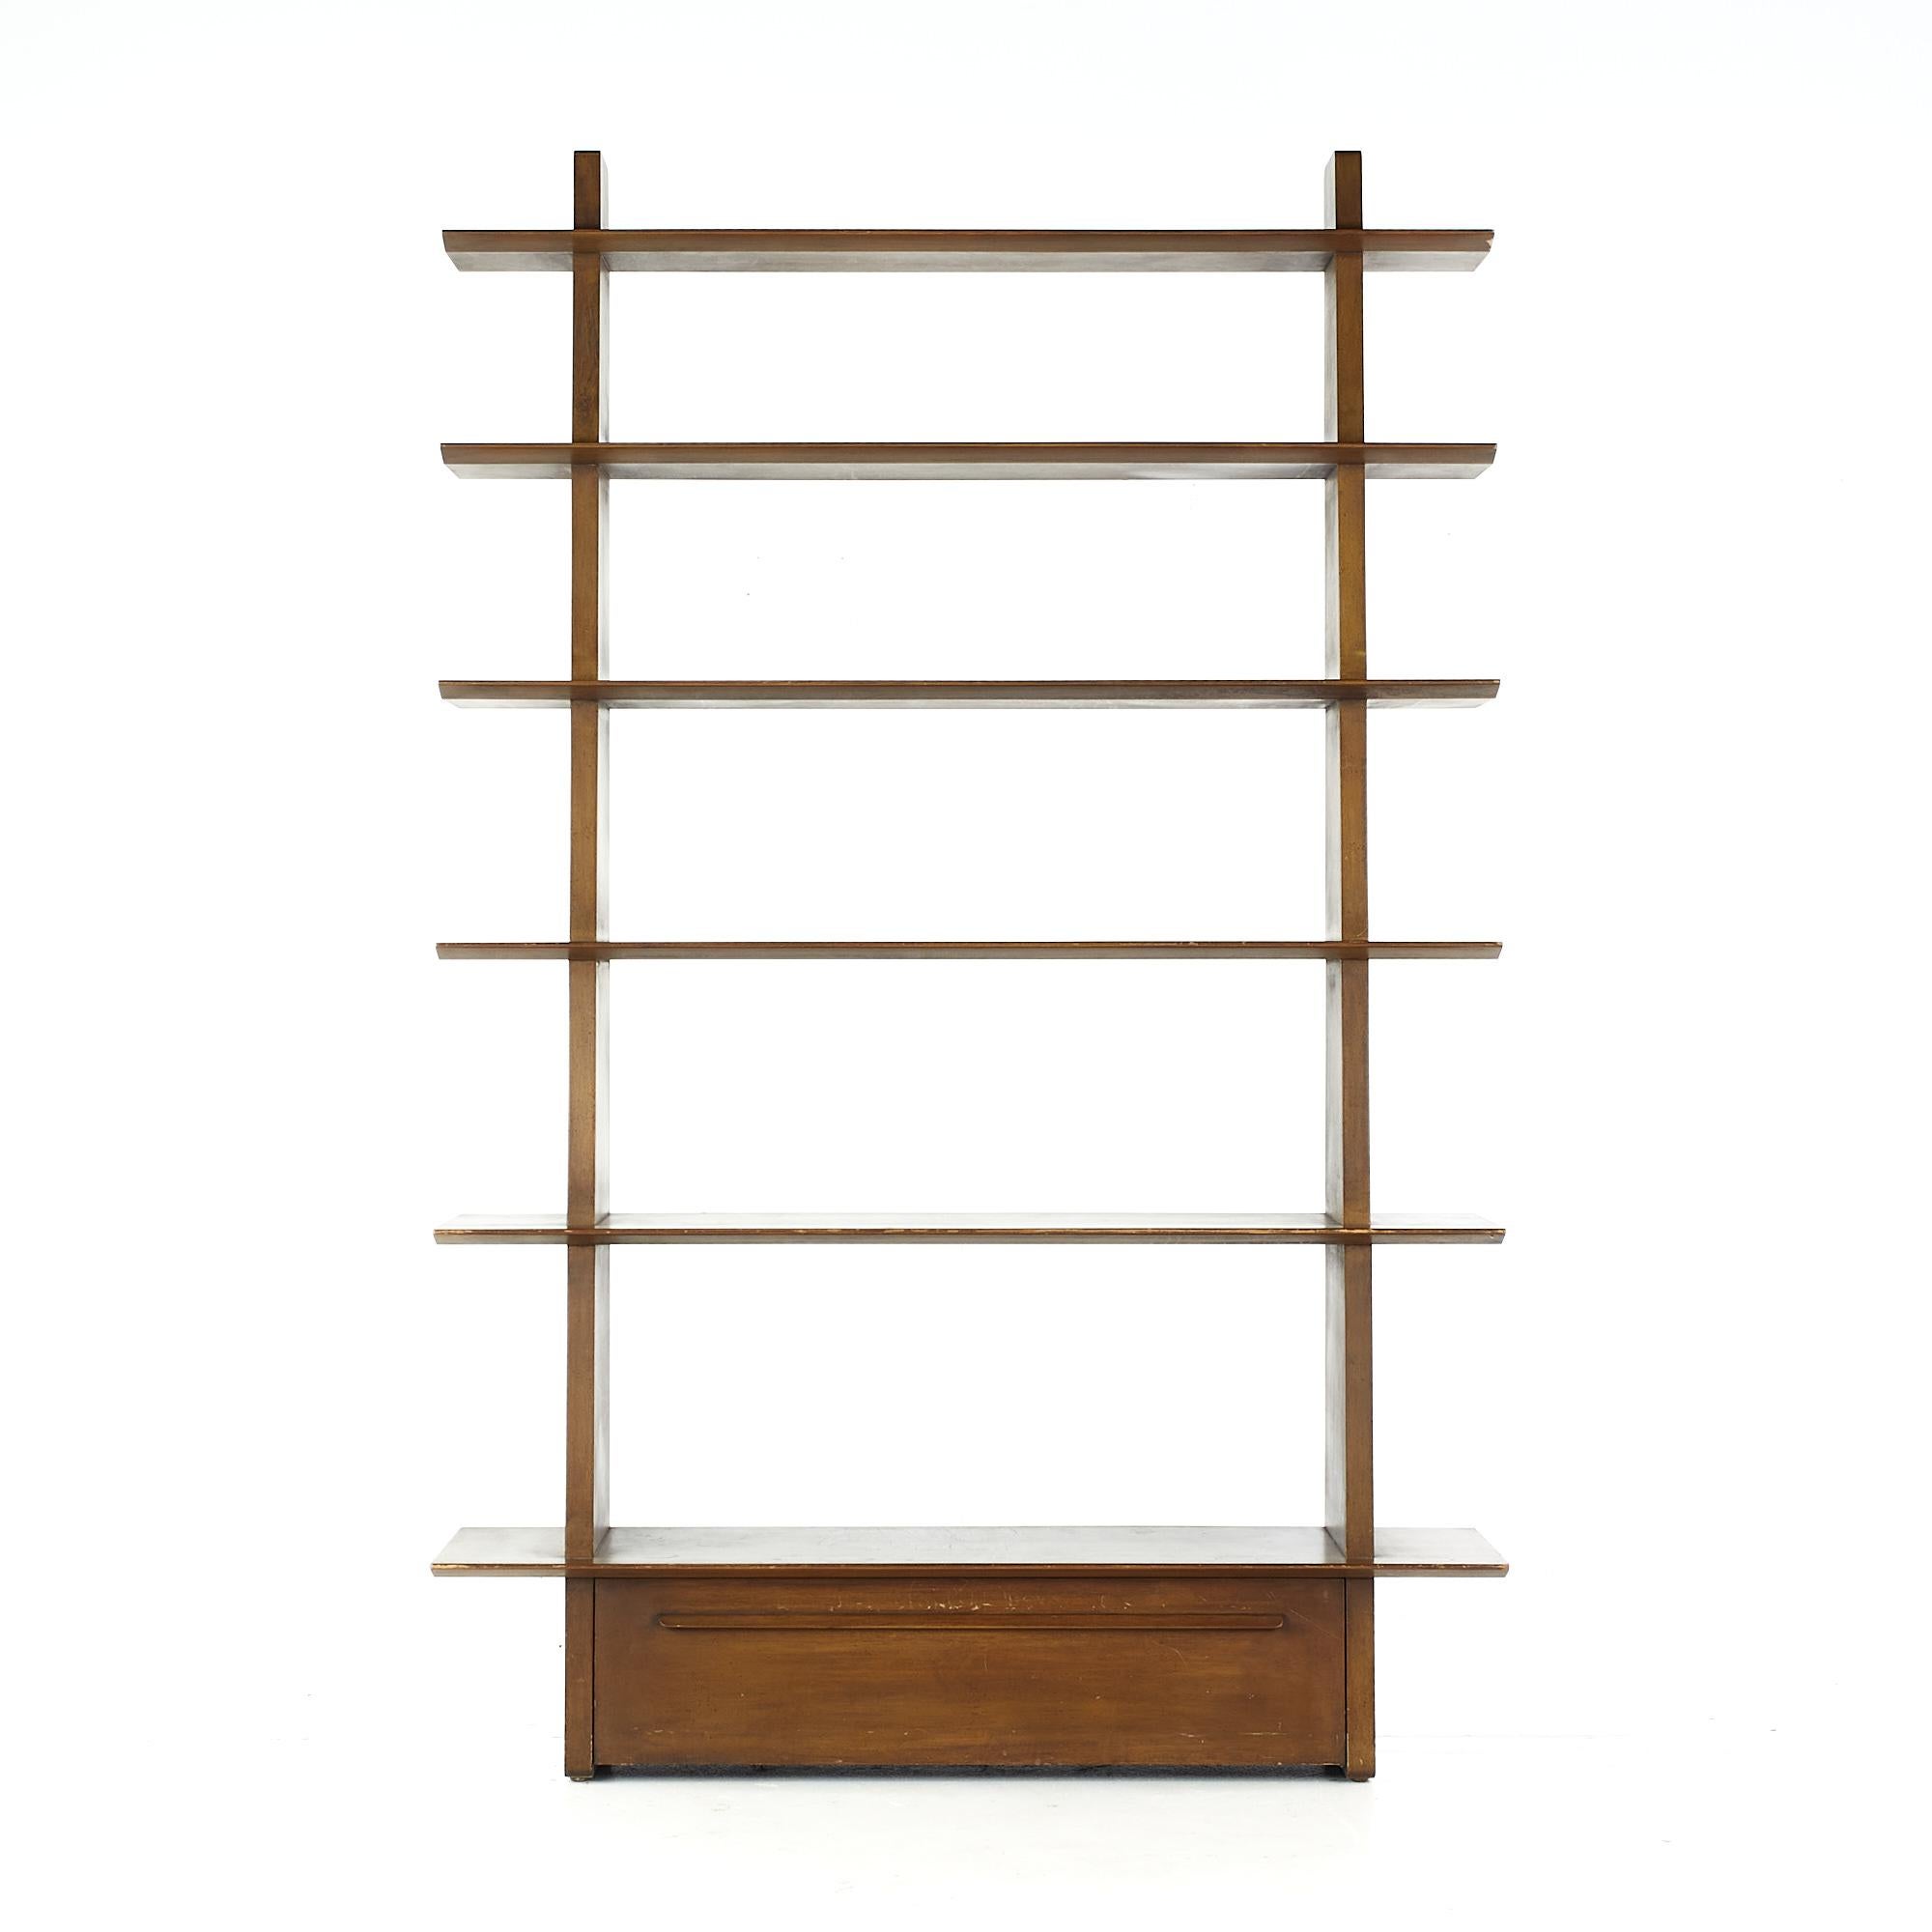 Edward Wormley for Dunbar mid-century model 5264 shelf bookcase.

This bookcase measures: 48 wide x 14.25 deep x 74.25 inches high.

All pieces of furniture can be had in what we call restored vintage condition. That means the piece is restored